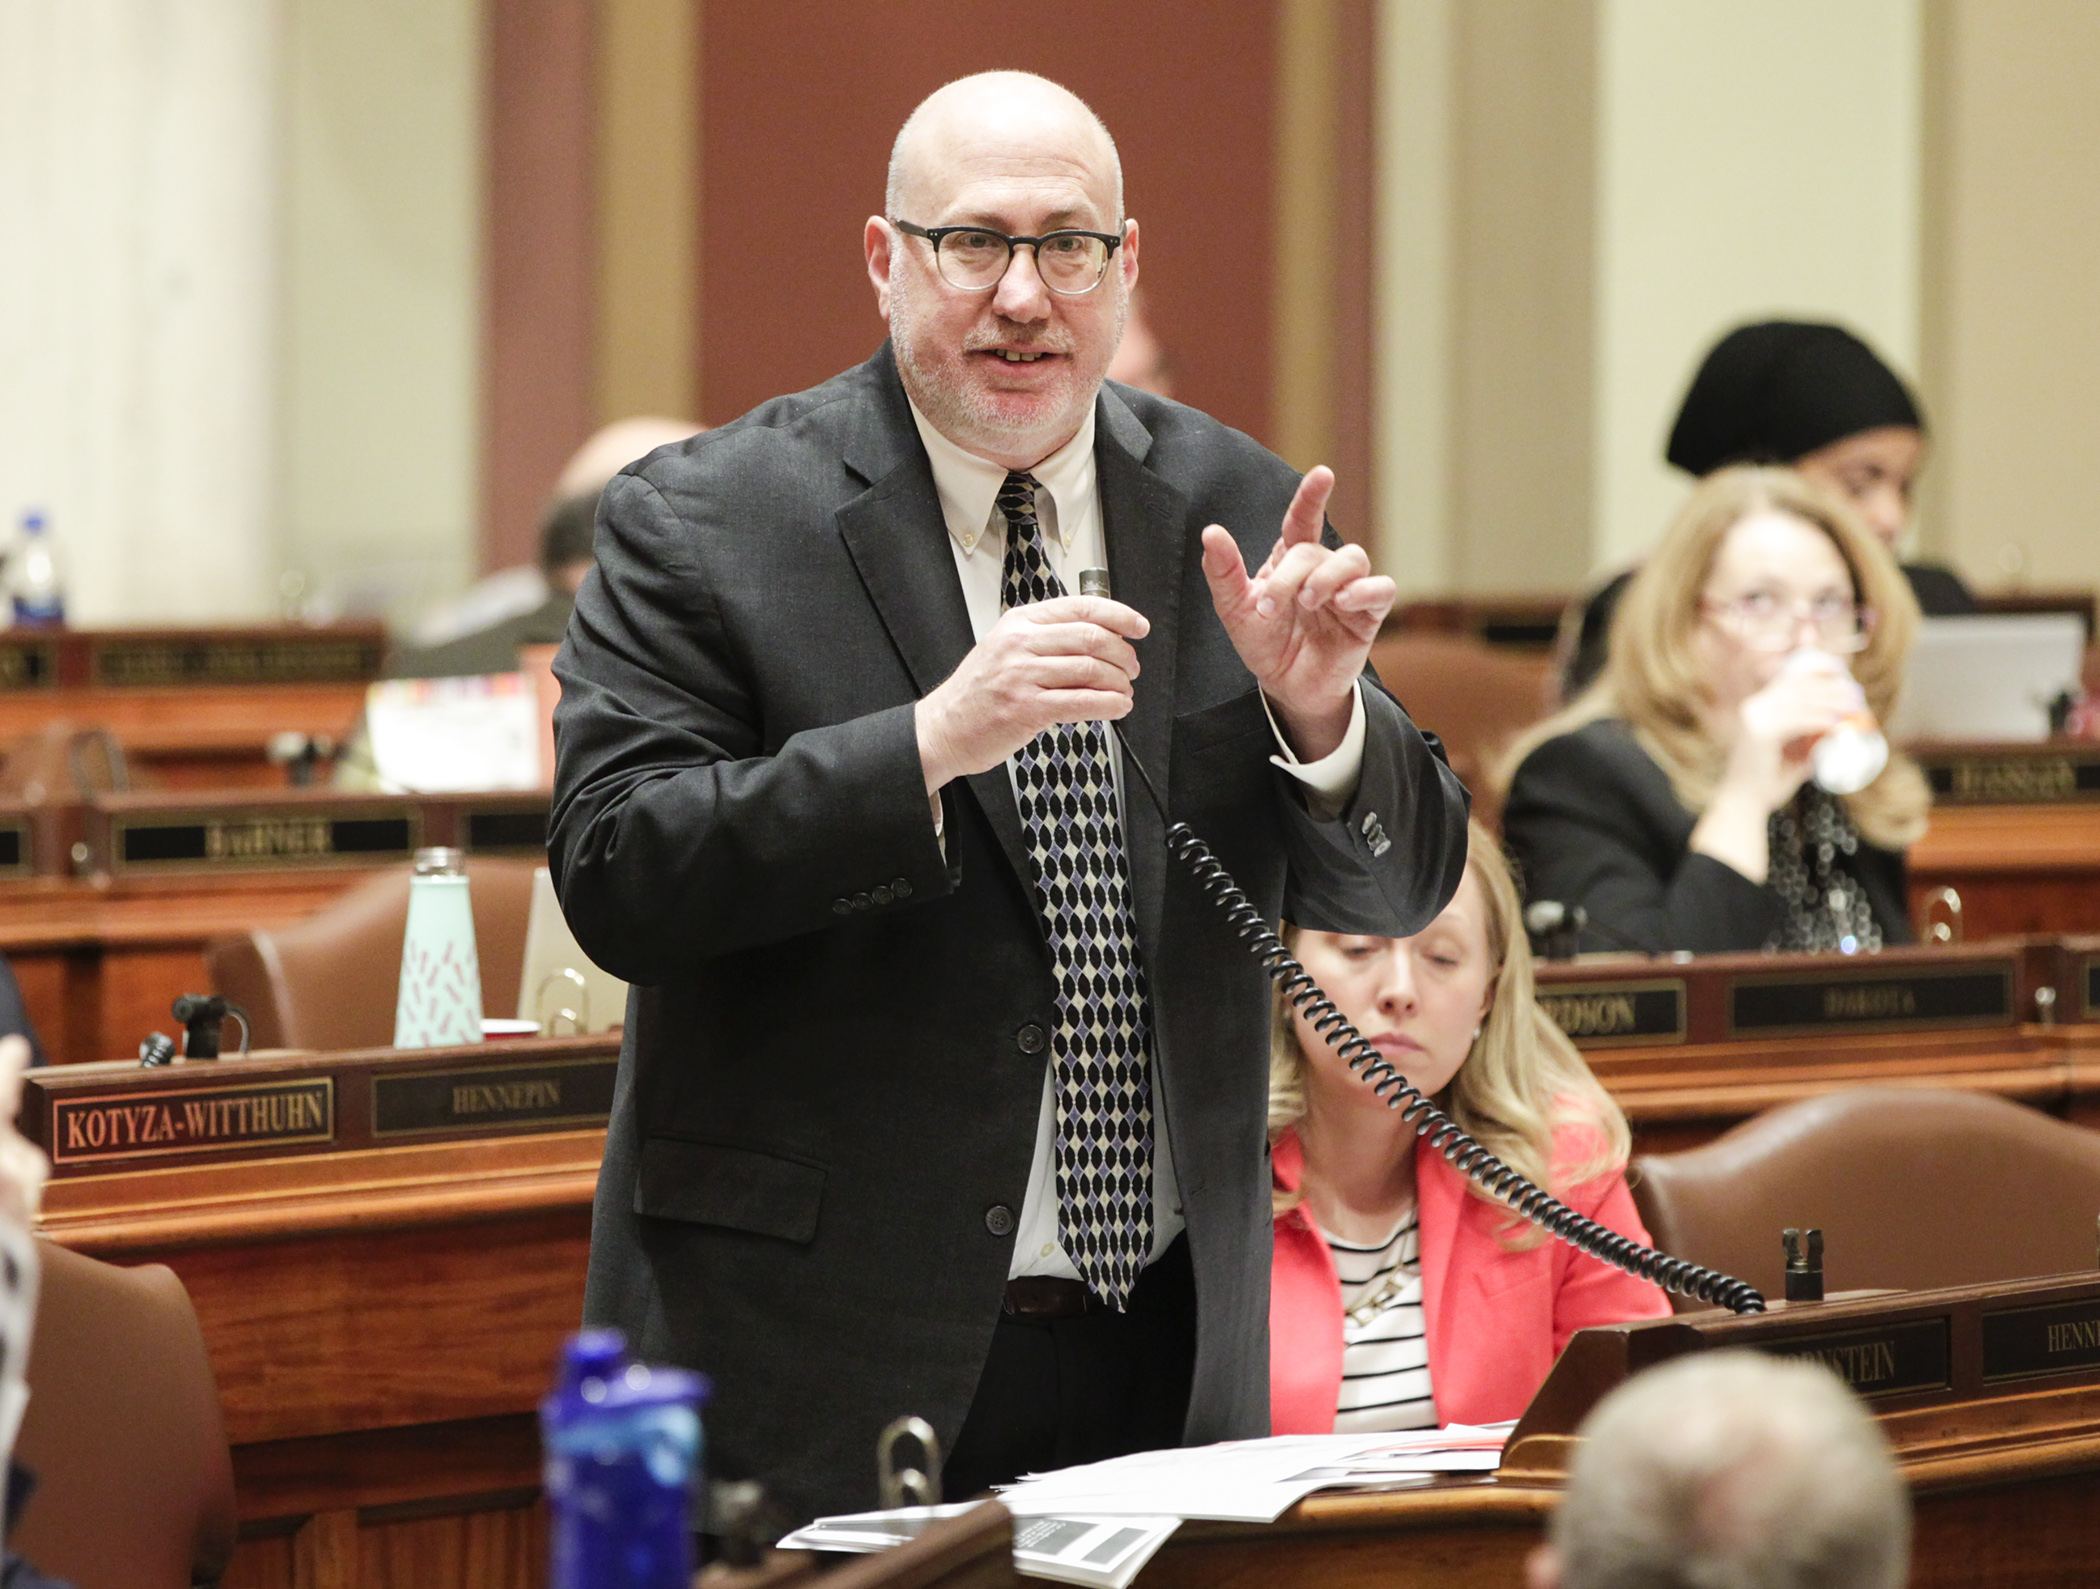 Rep. Frank Hornstein responds to a member question during debate on his bill HF50, the so-called “hands-free” cellphone bill March 18. Photo by Paul Battaglia